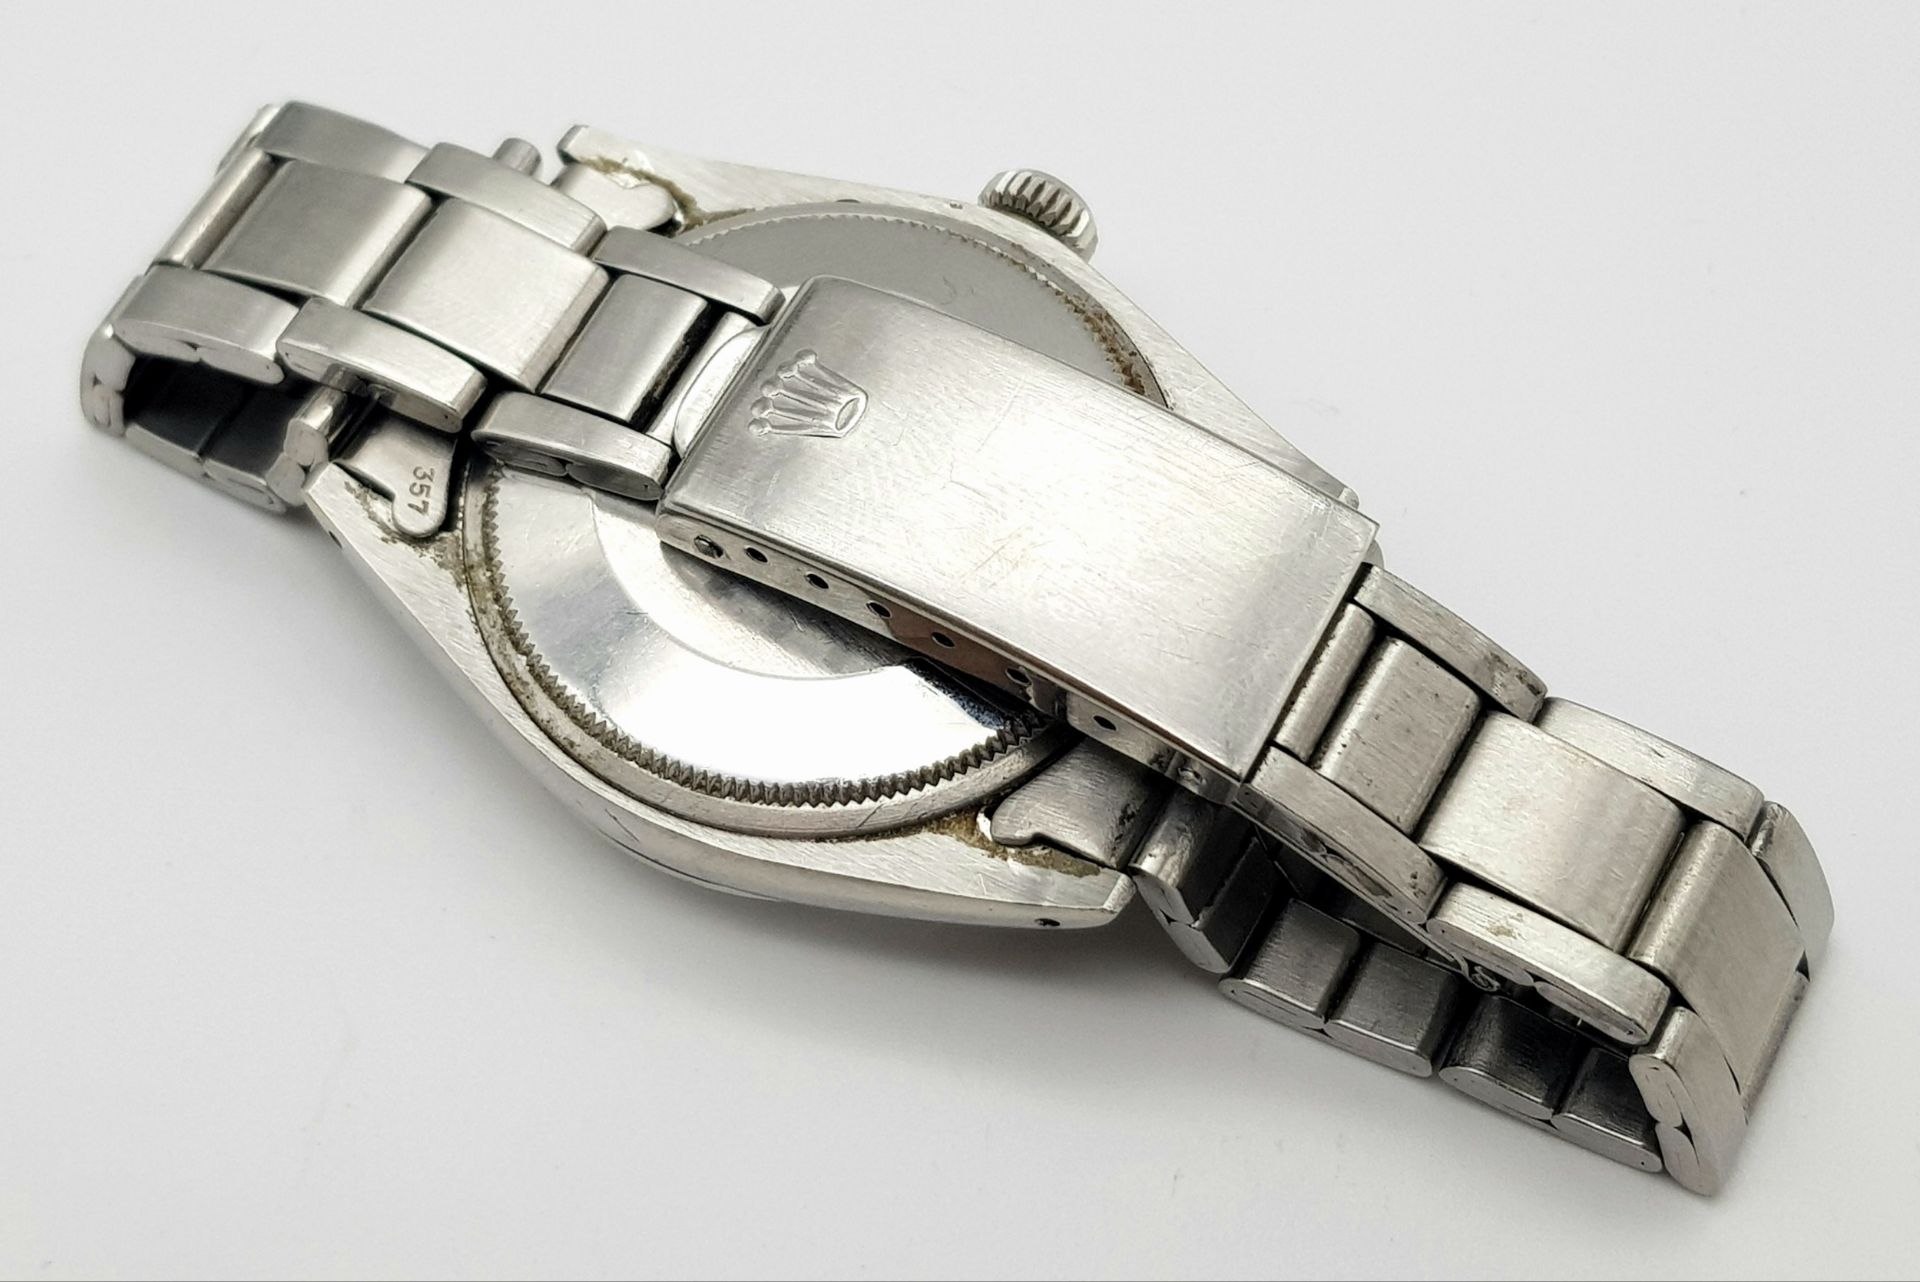 A Vintage Rolex Air King Mid Size Automatic Watch. Stainless steel bracelet and case - 35mm. - Image 5 of 8